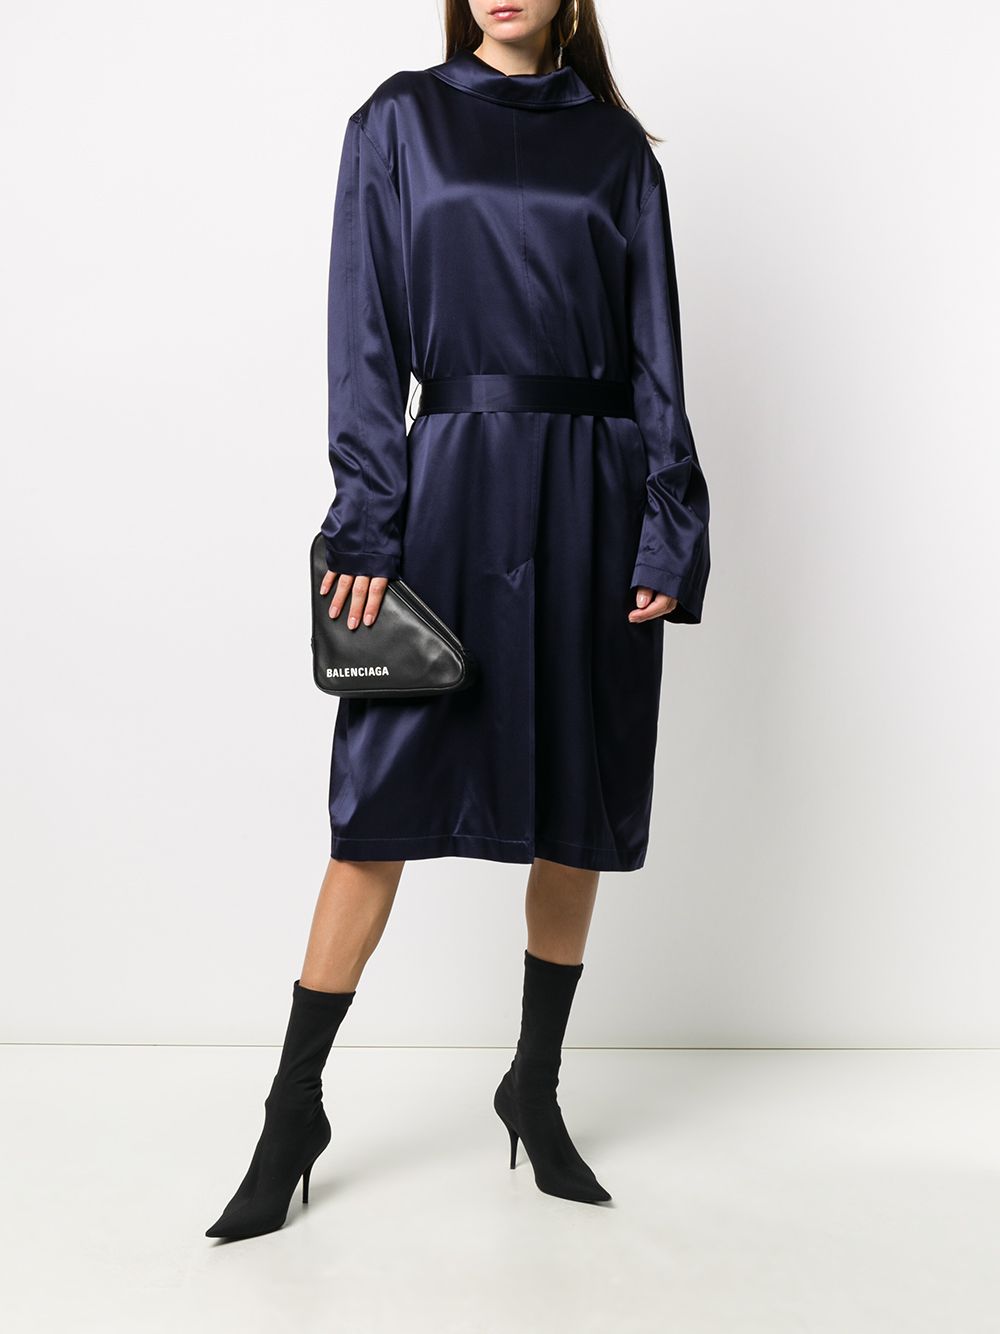 Shop Balenciaga back to front trench dress with Express Delivery - FARFETCH